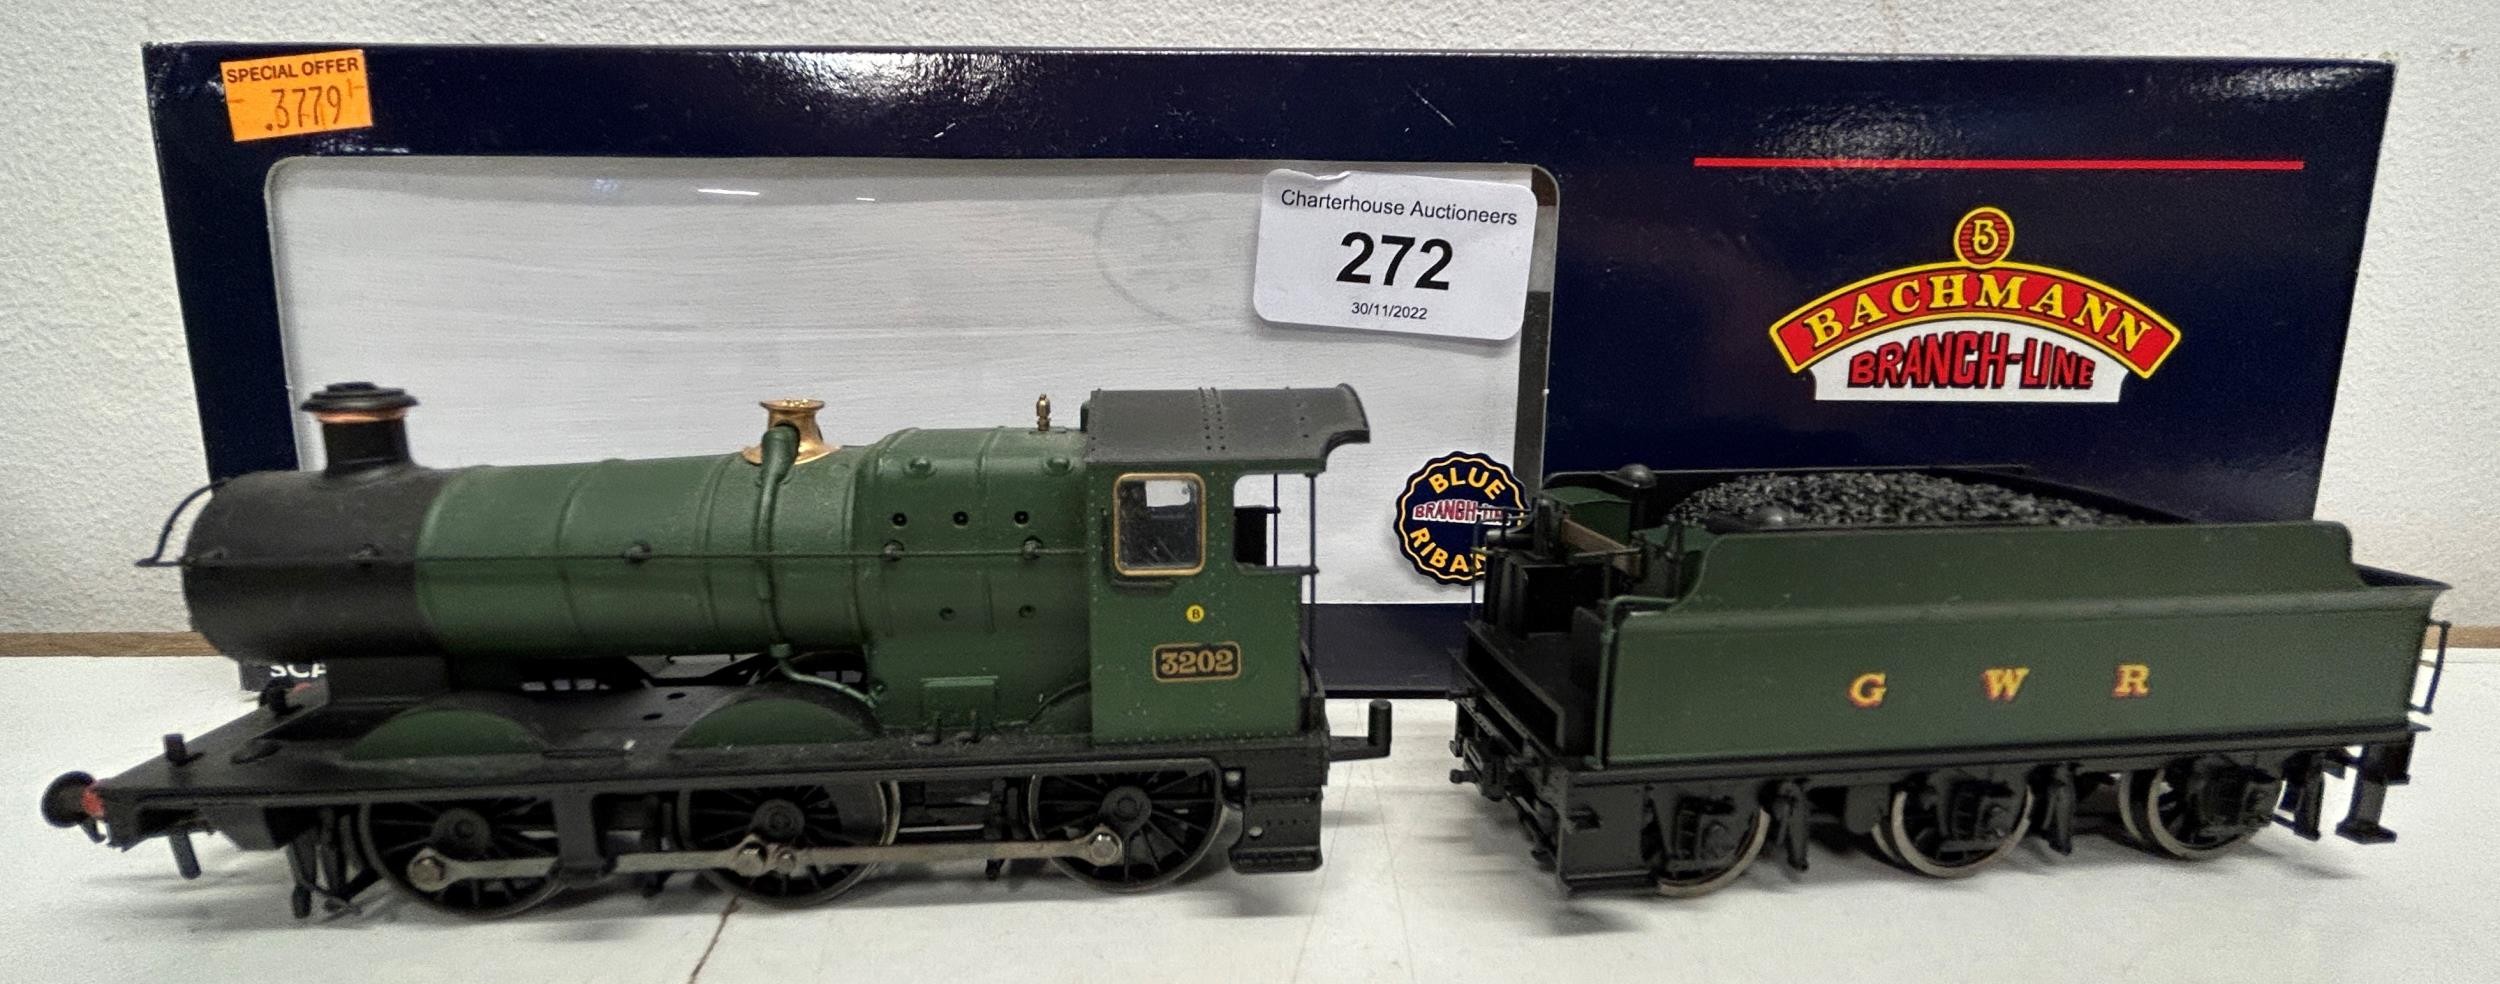 A Bachmann OO gauge 0-6-0 locomotive and tender, No 32-300, boxed Provenance: From a vast single